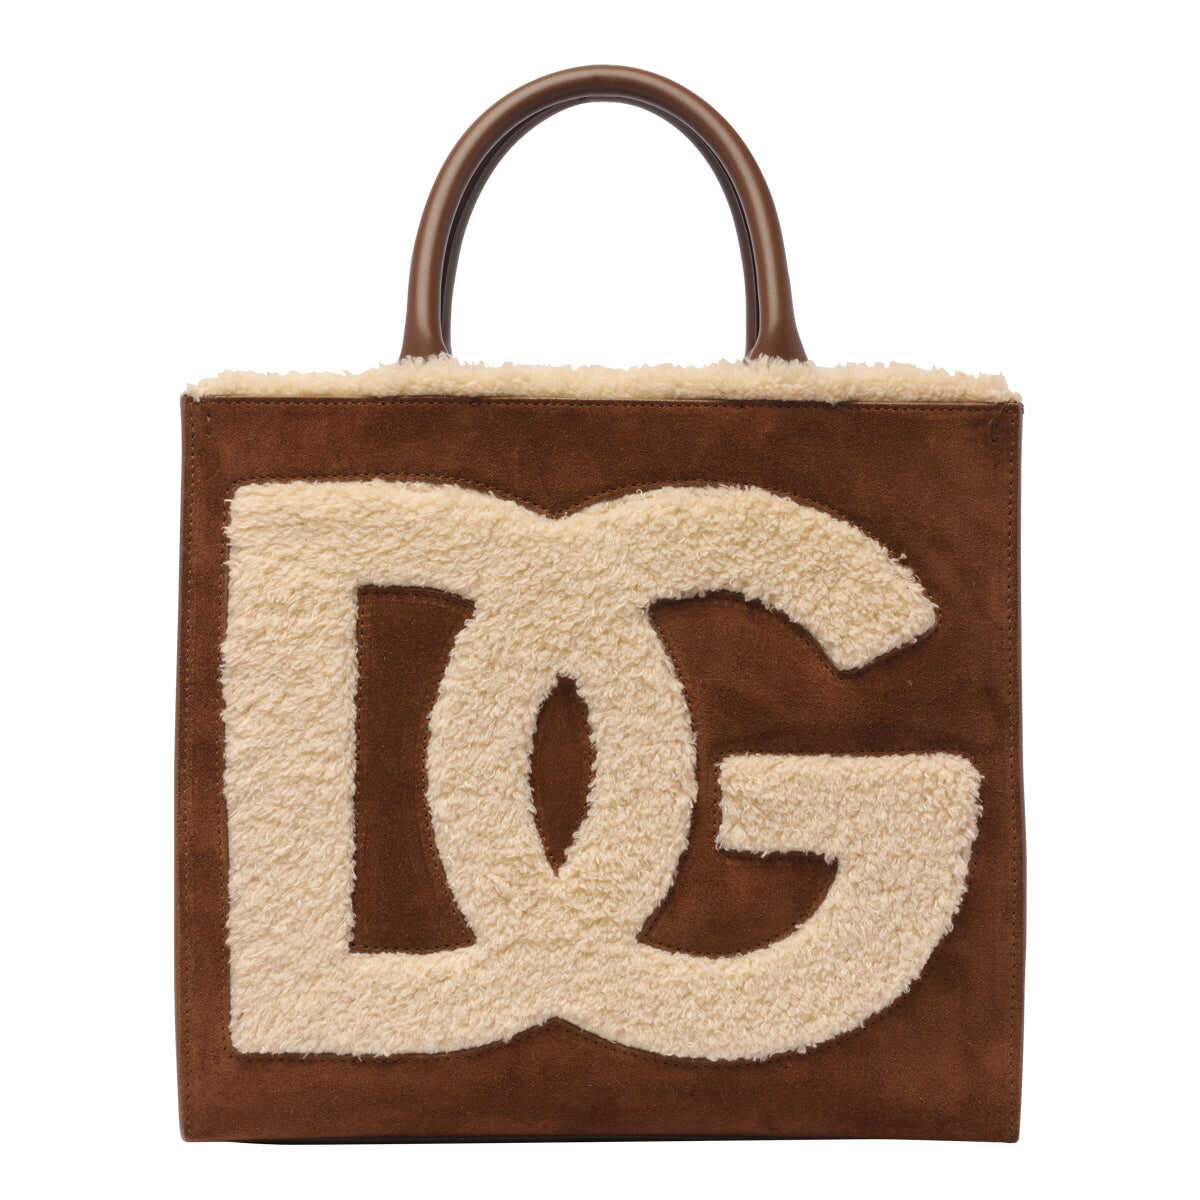 Dolce & Gabbana DOLCE & GABBANA DG Daily small suede tote bag CAMEL